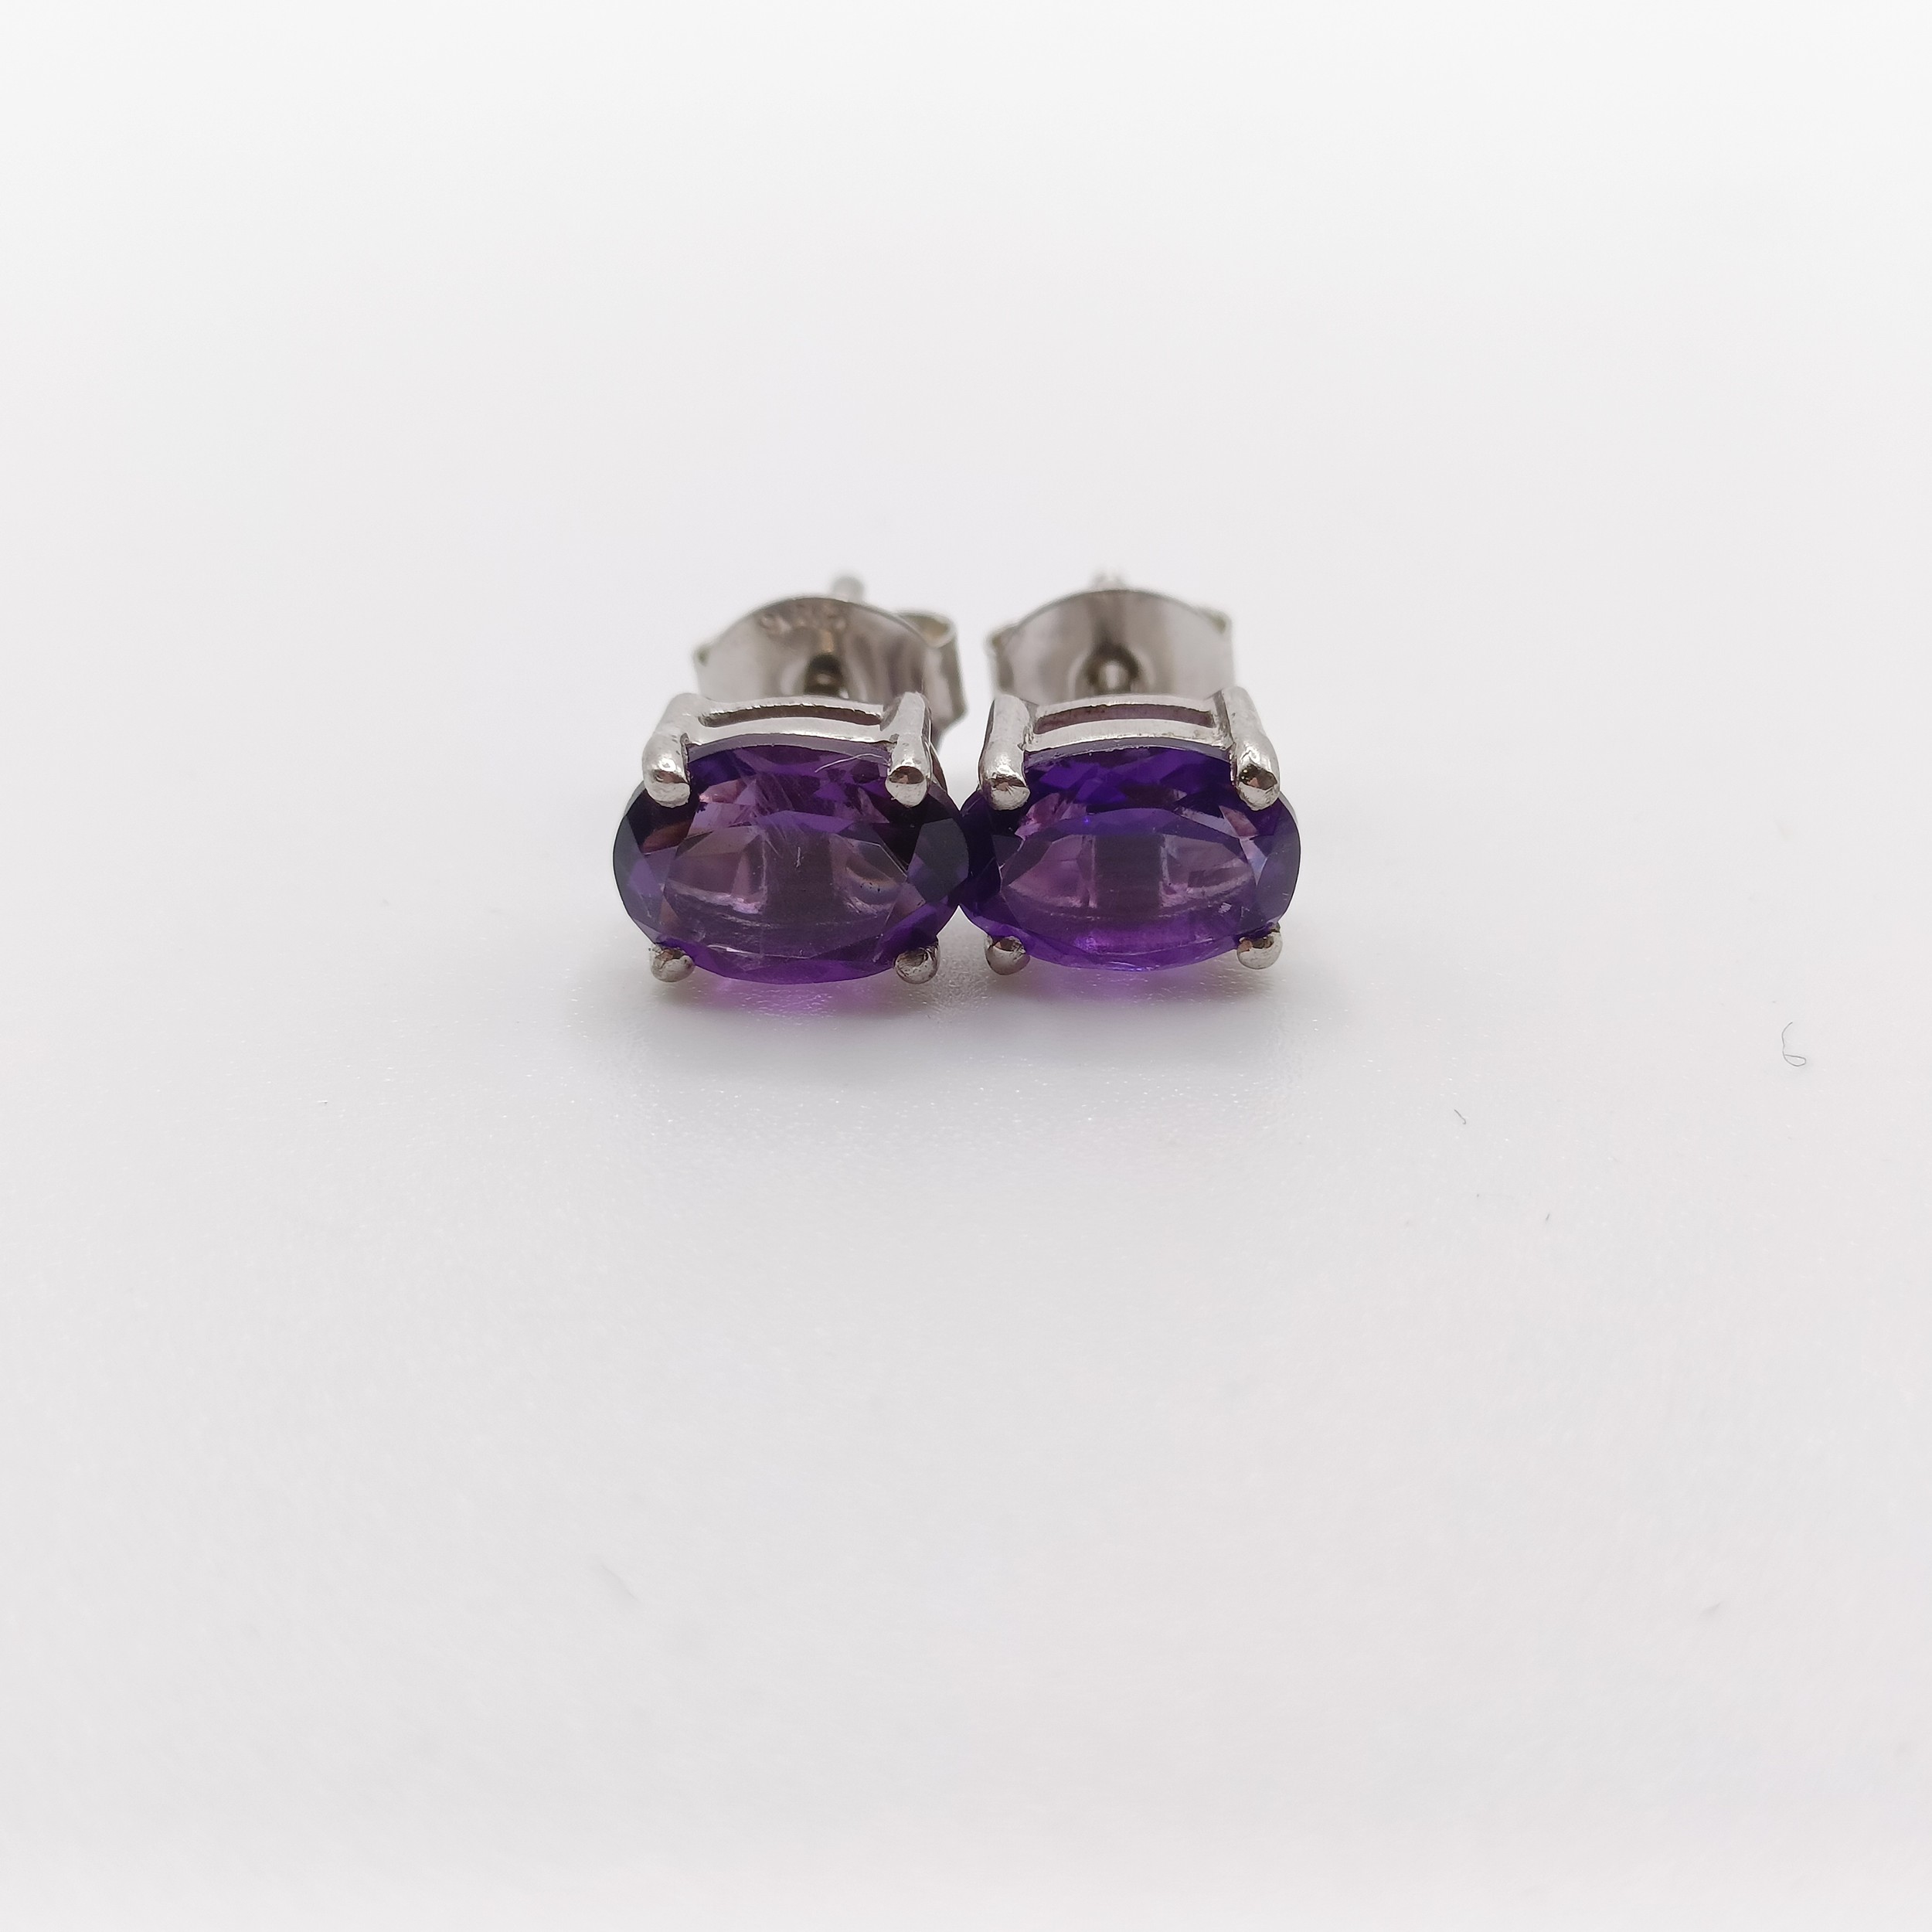 A pair of amethyst studs, in silver - Image 6 of 6